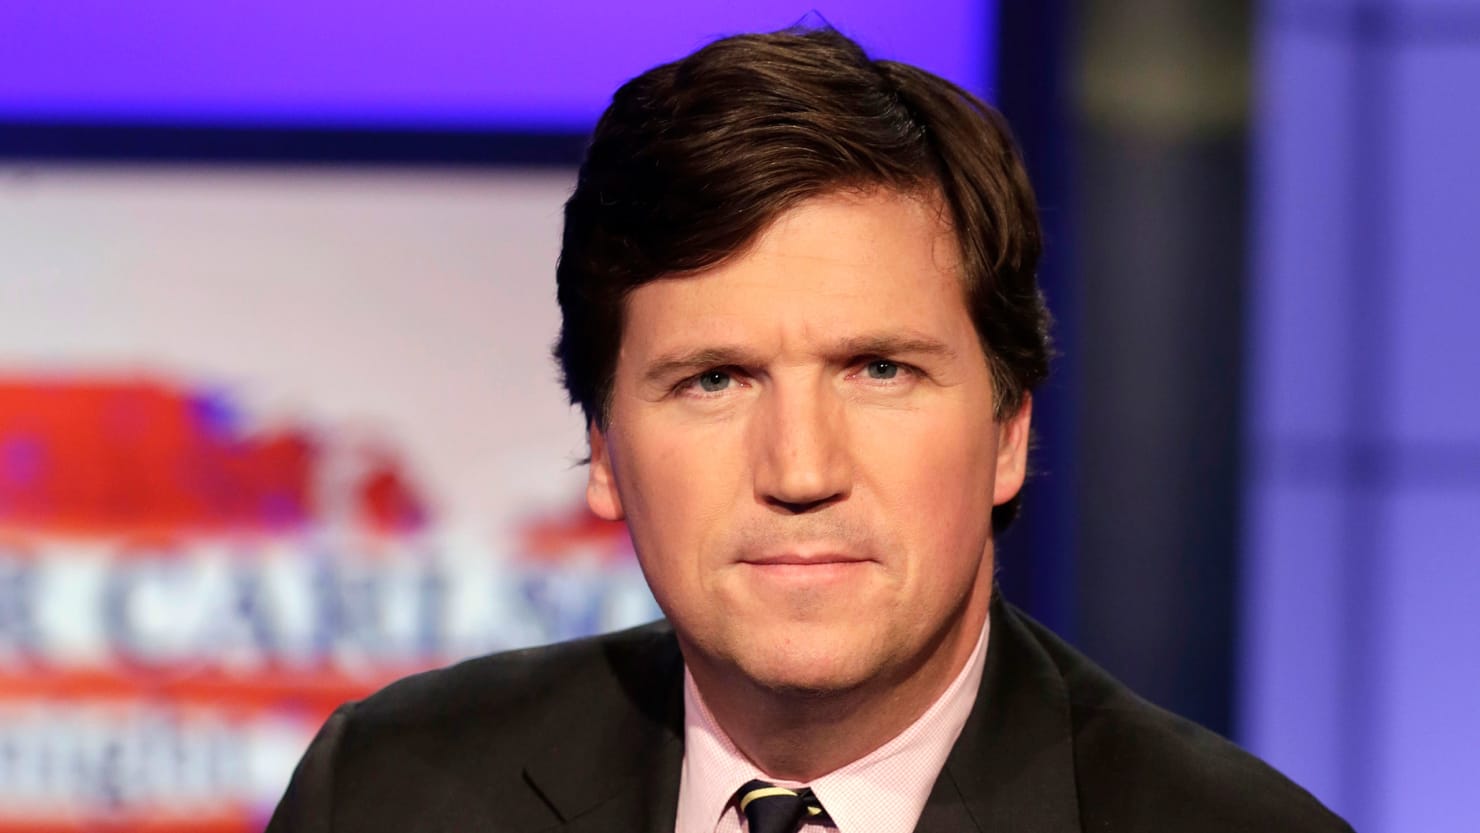 Tucker Carlson: There Aren’t ‘That Many’ Hate Crimes, So ‘They Have to’